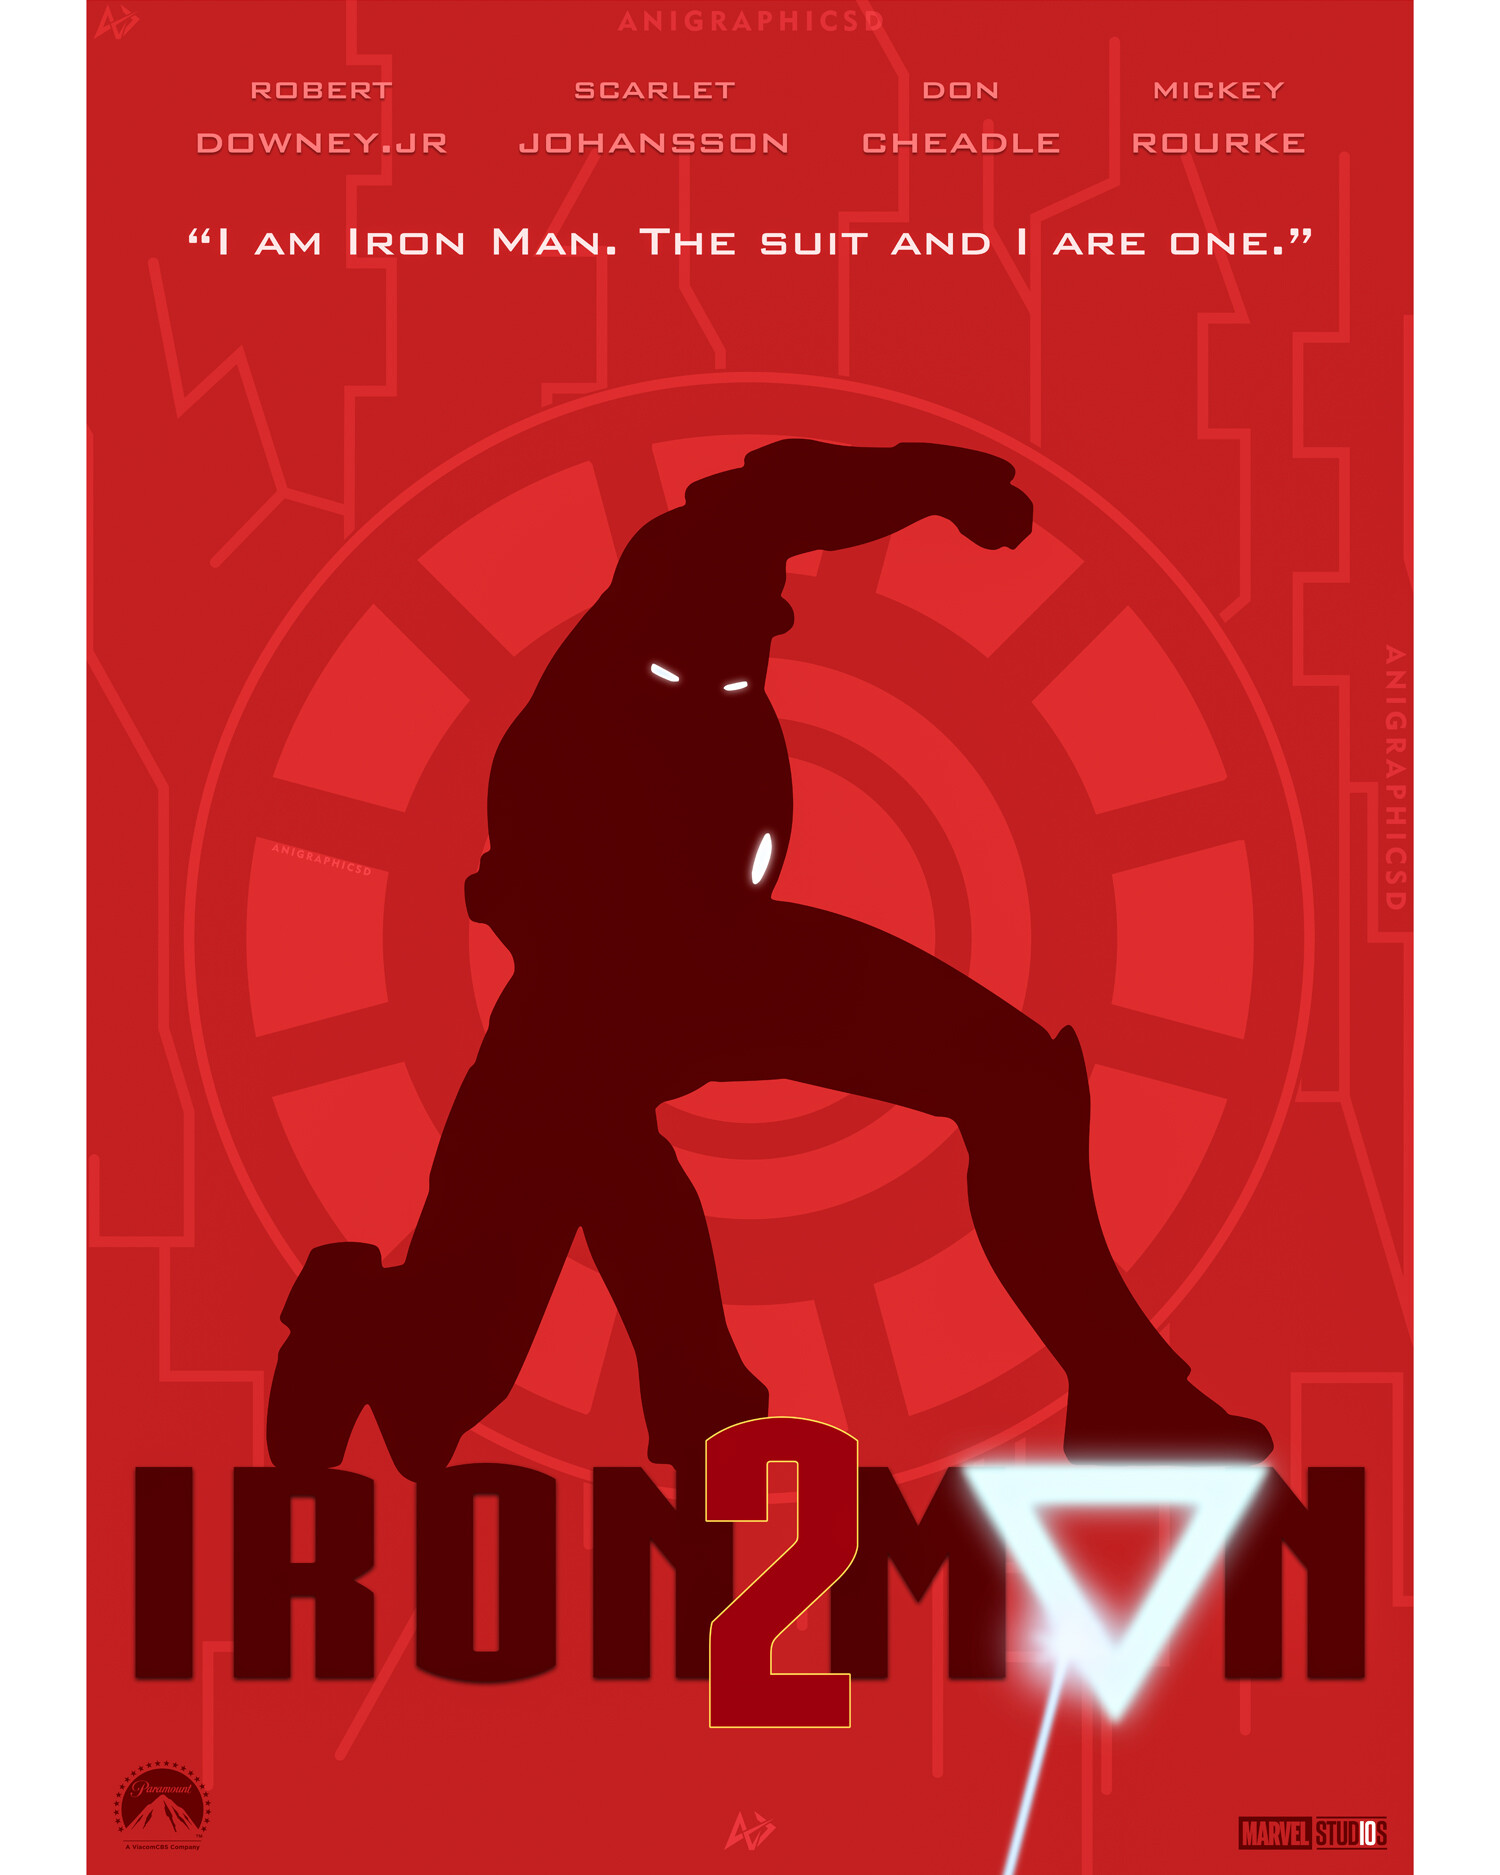 iron man 2 official poster